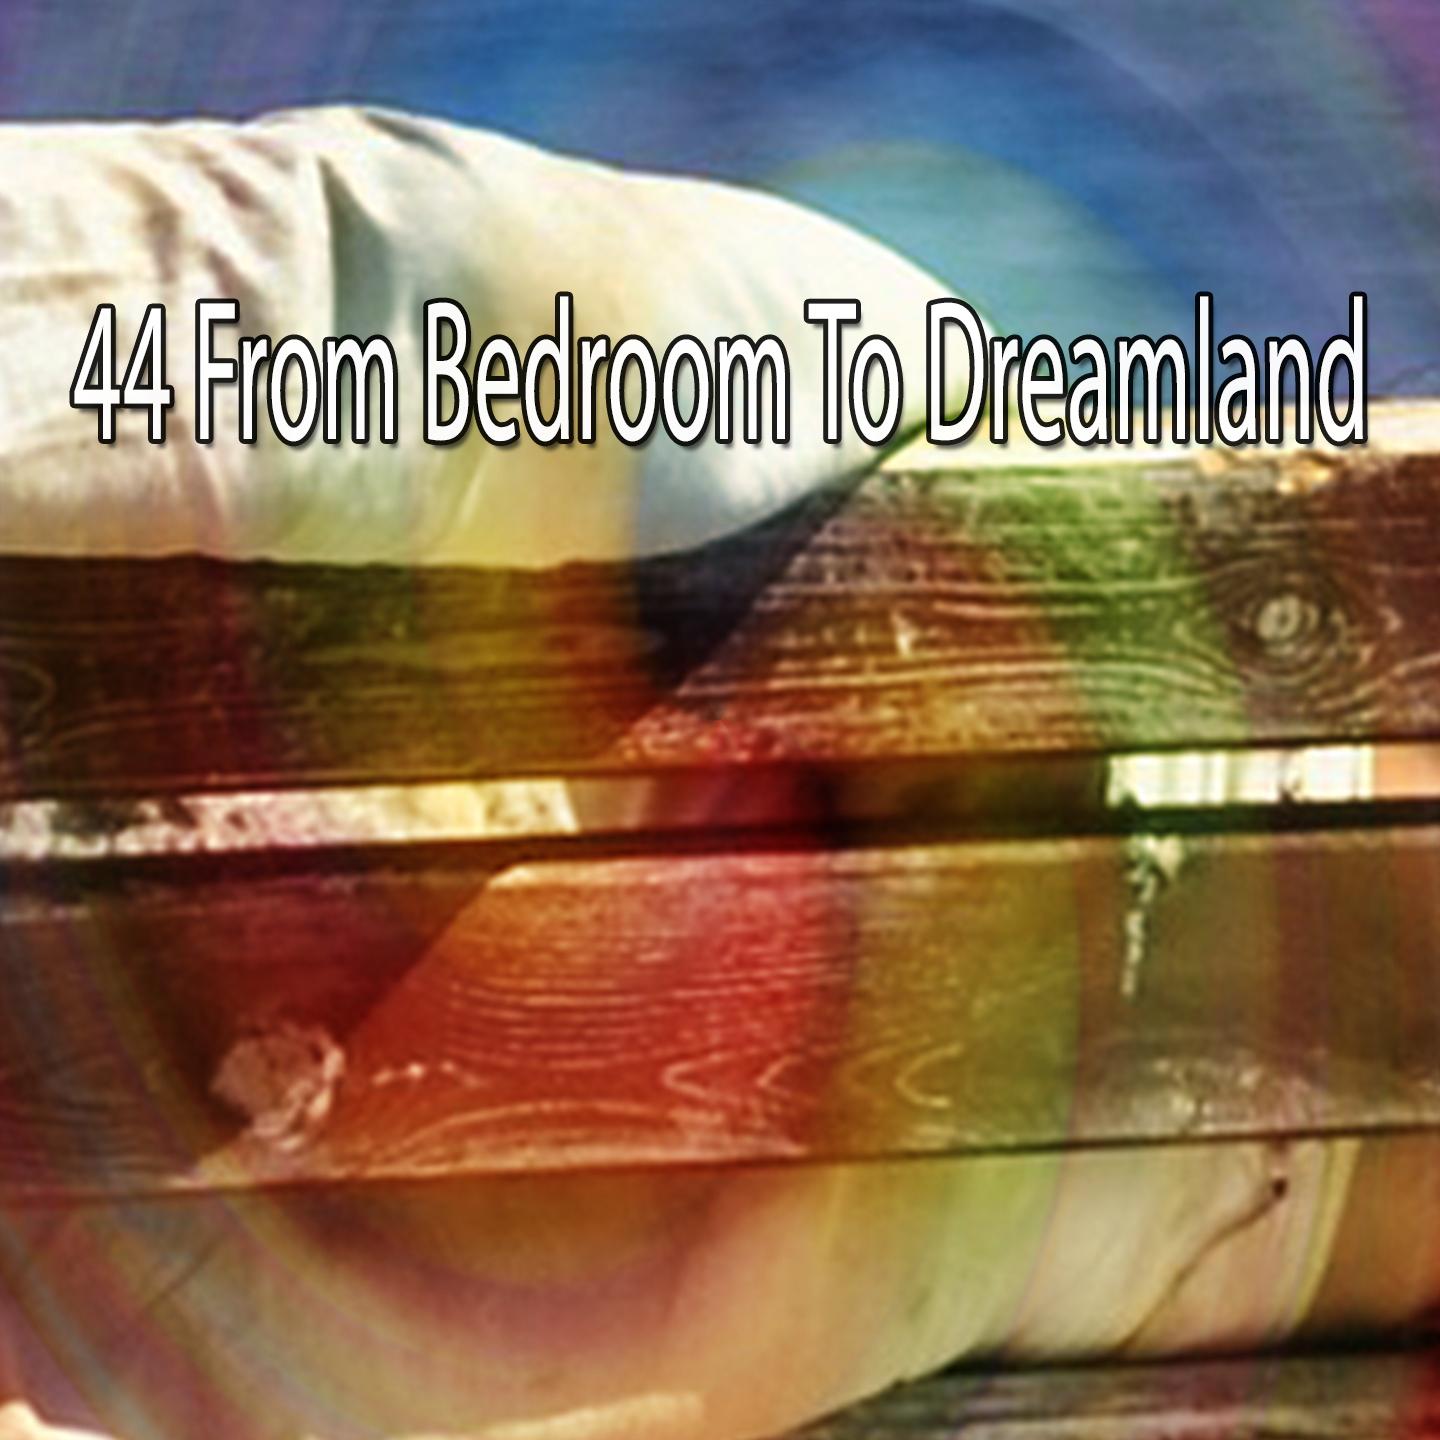 44 From Bedroom to Dreamland